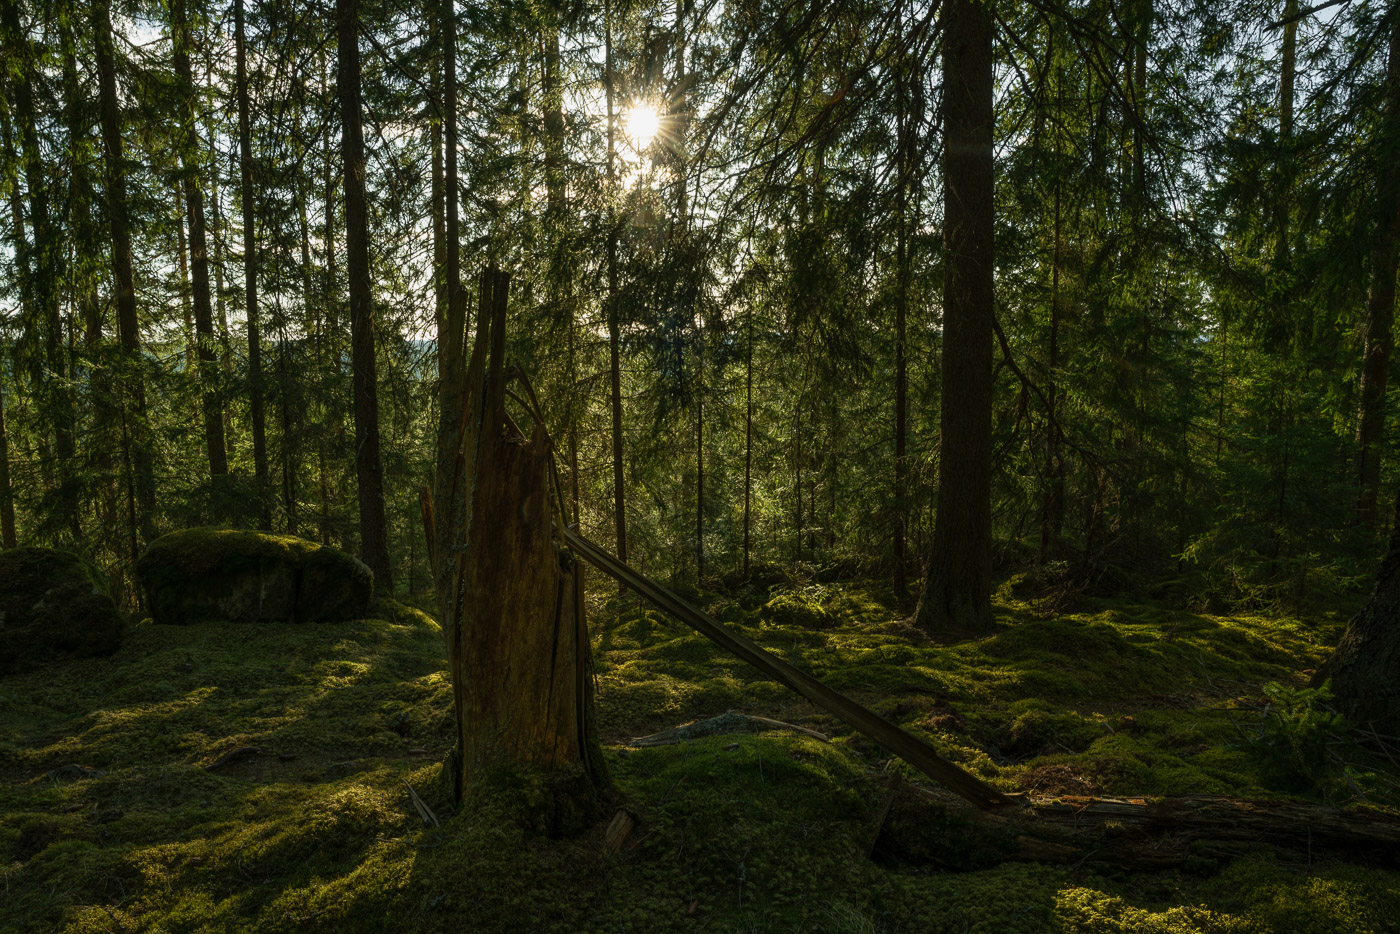 A wildlife tree in the middle of a mossy forest at sunset